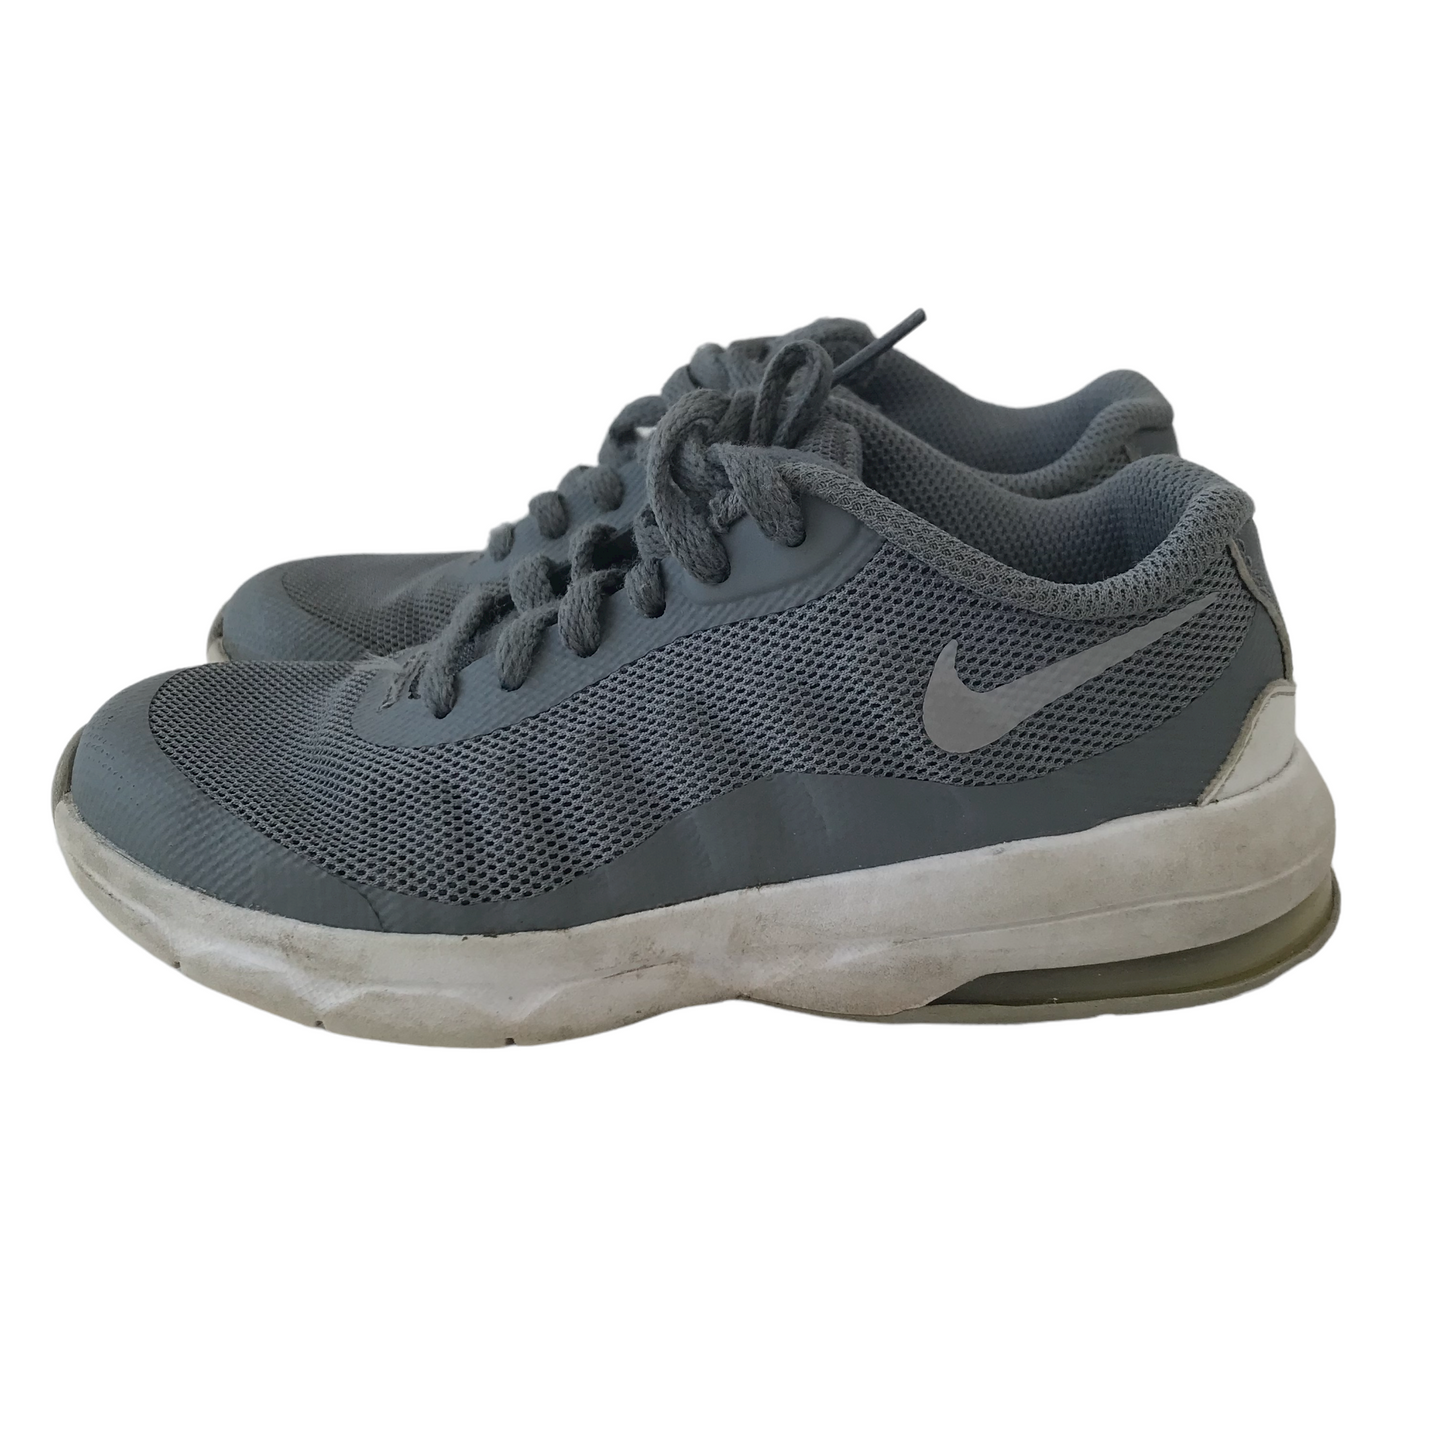 Nike Air Grey Trainers Shoe Size 12 (jr)